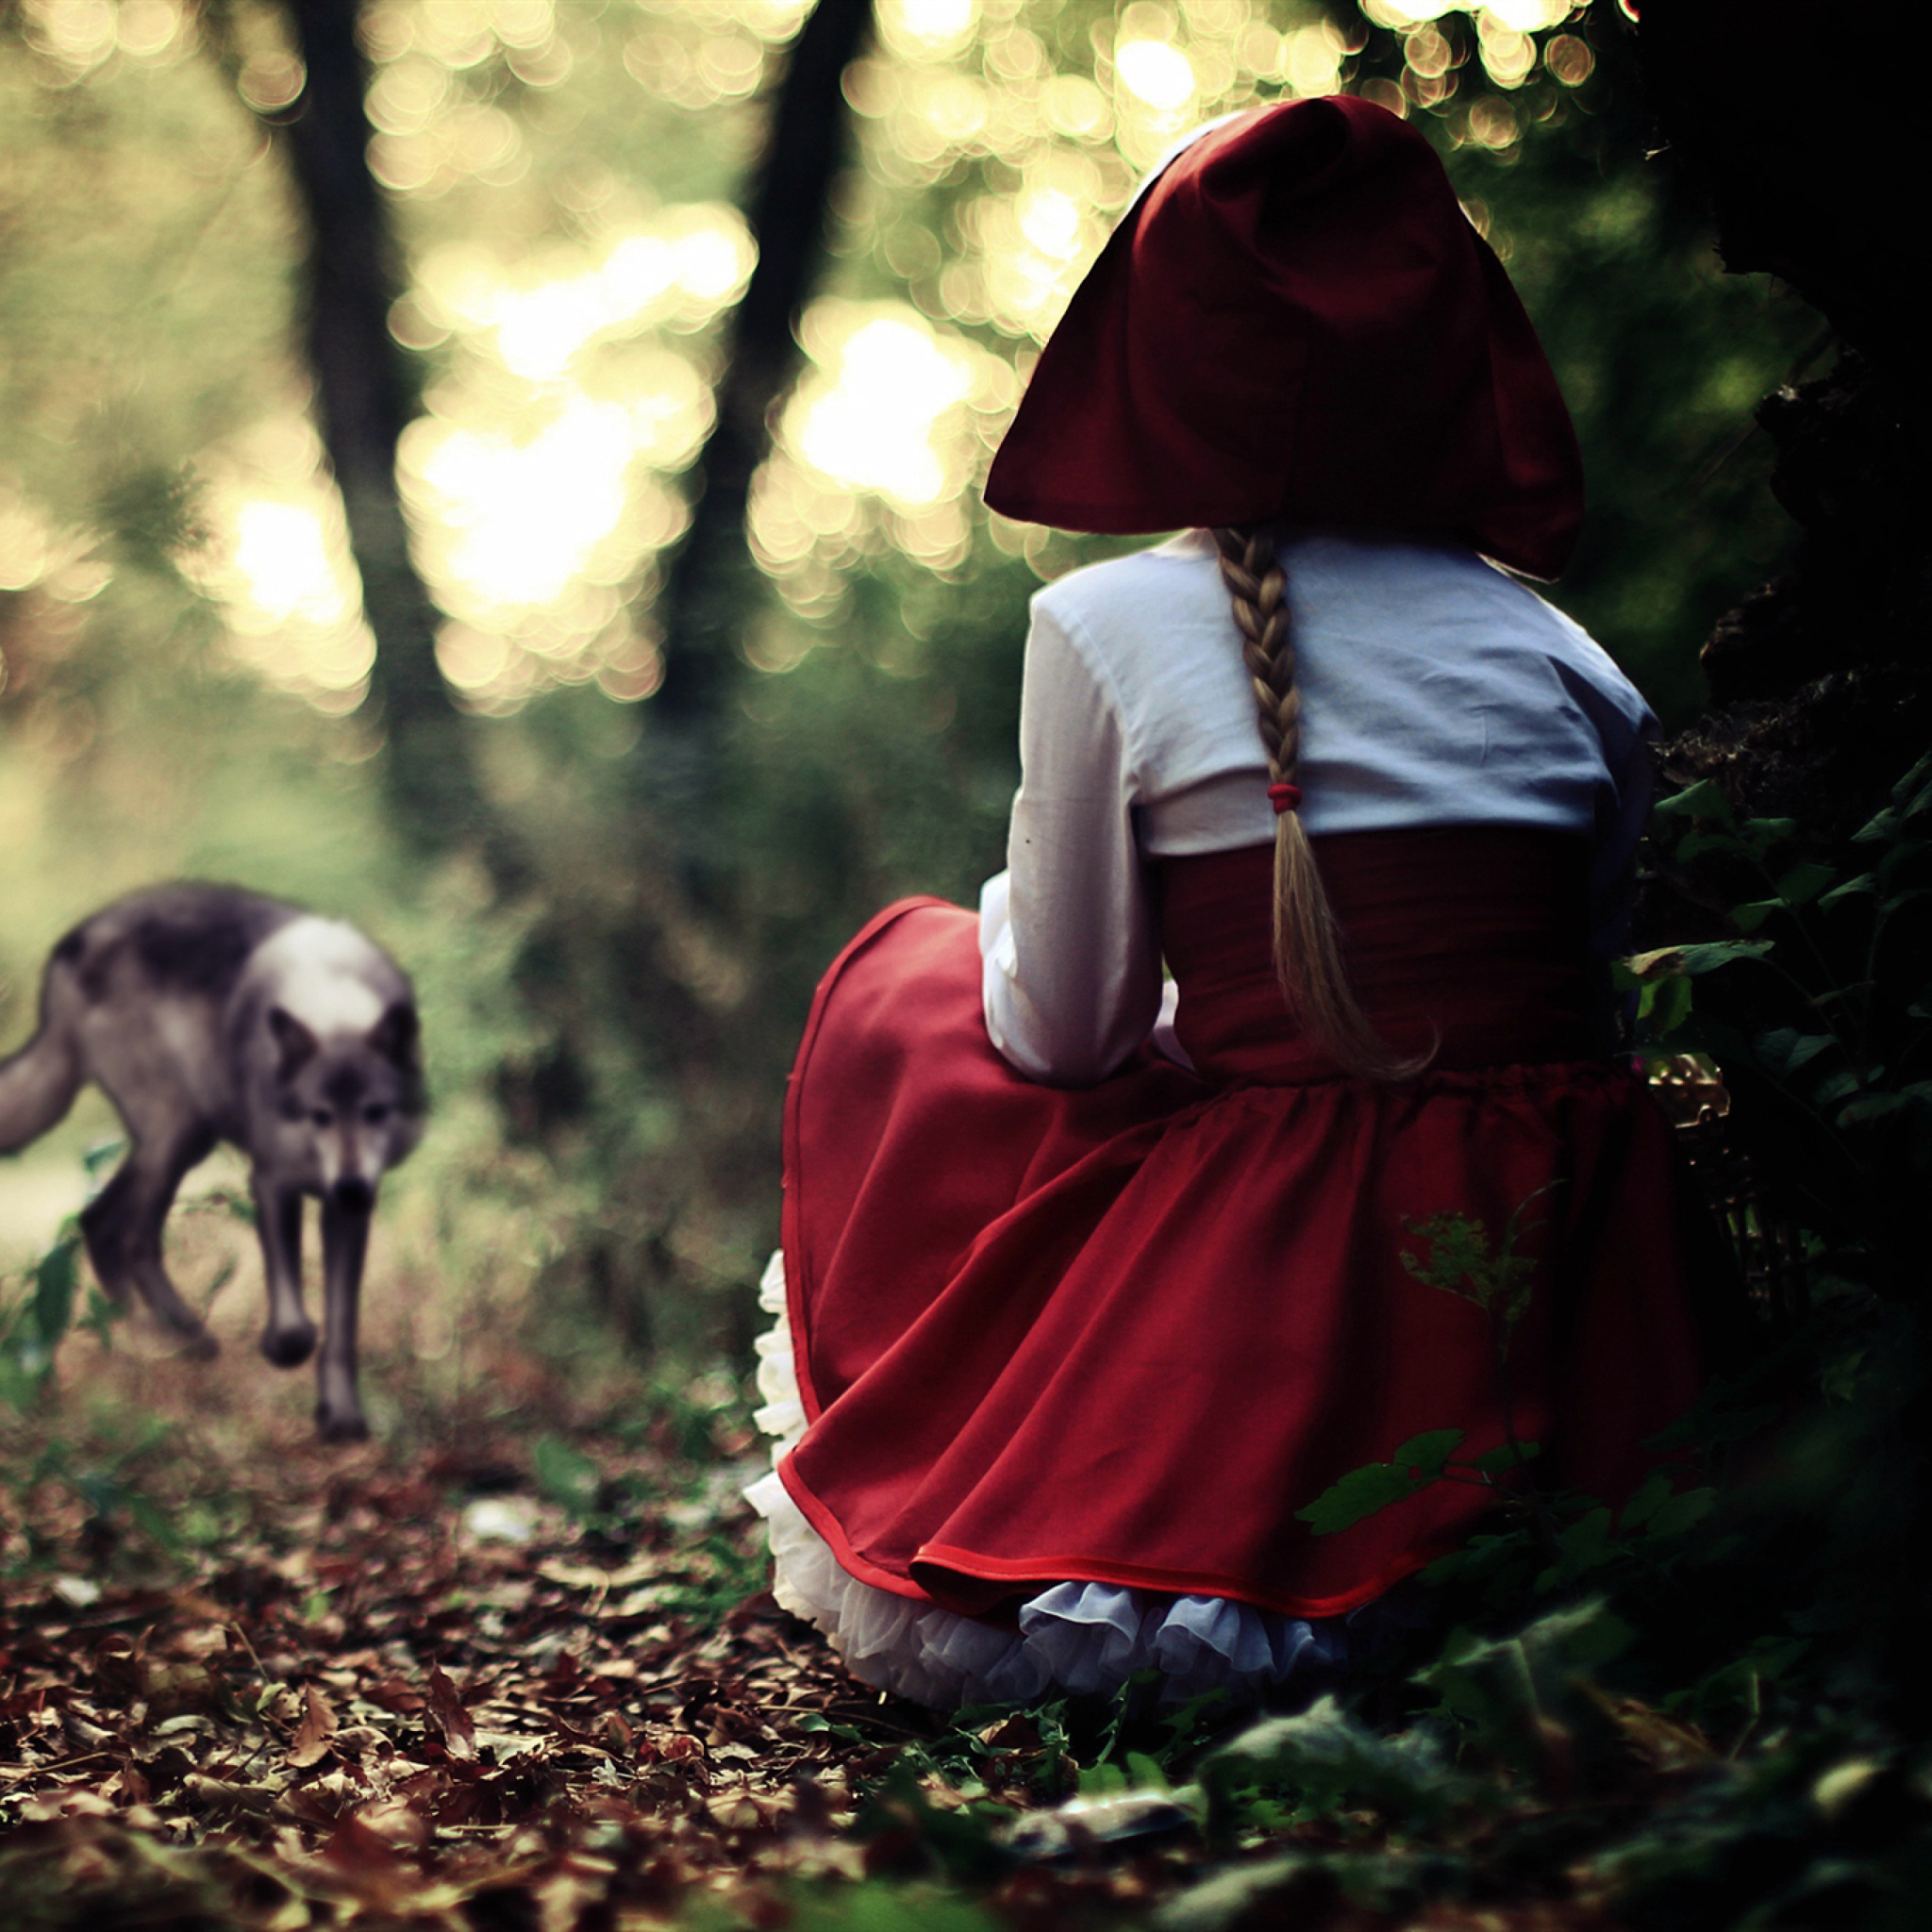 Red Riding Hood In Forest wallpaper 2048x2048